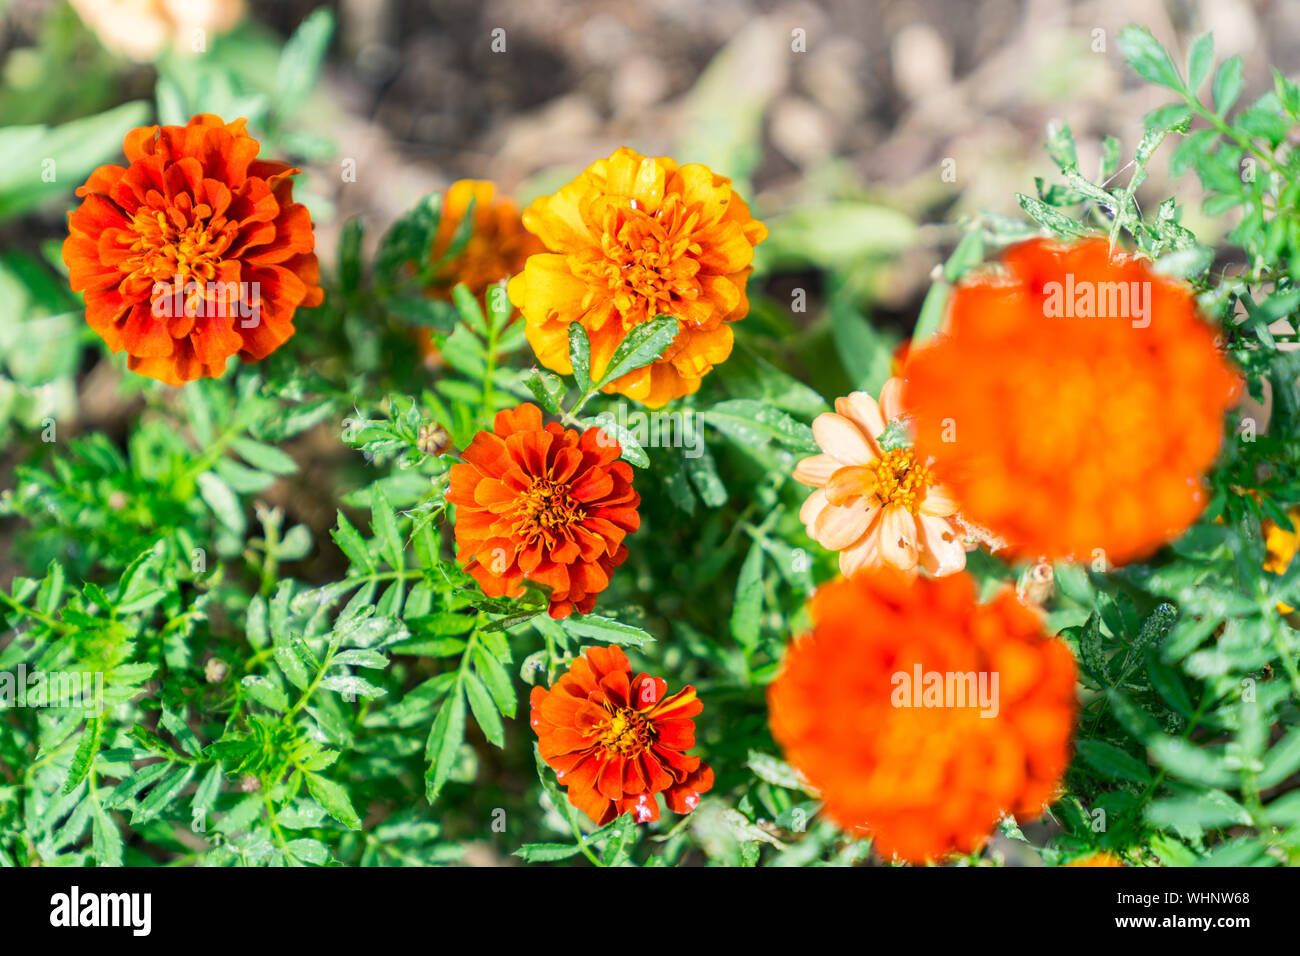 Close-up Marigold Flowers with Vivid Orange and Red Colors. Stock Photo